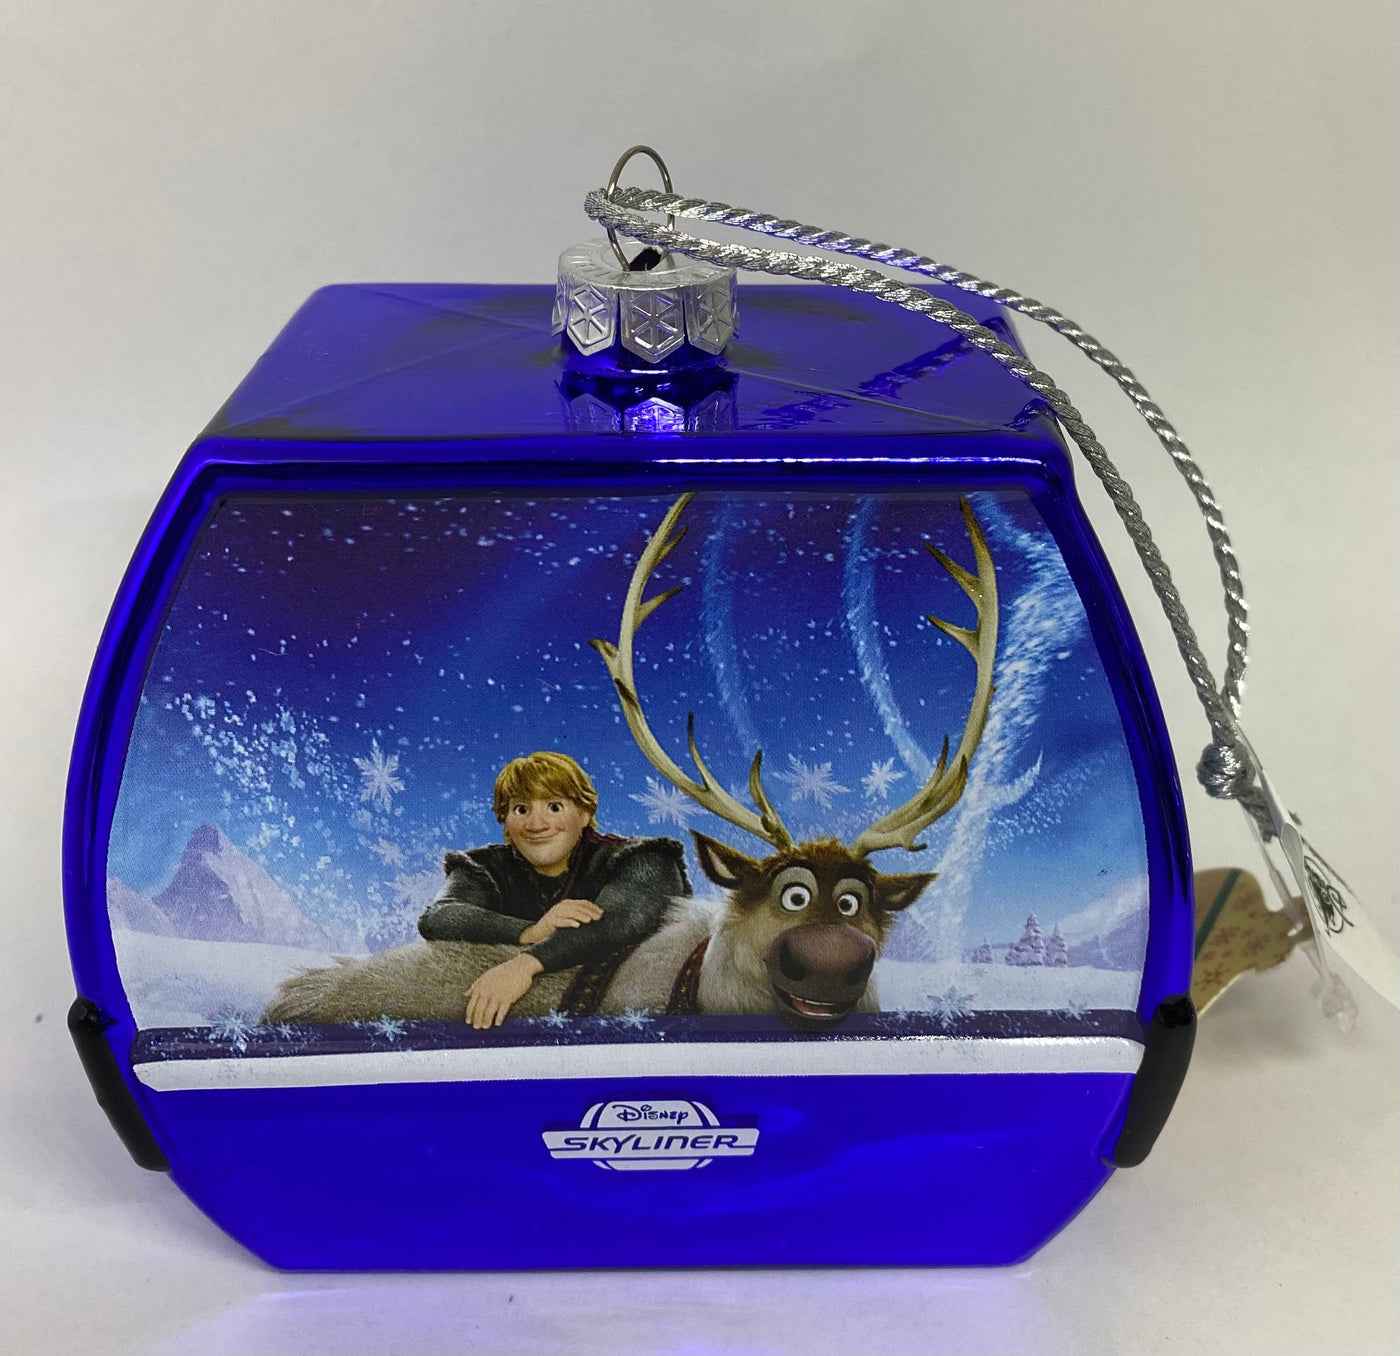 Disney Parks Skyliner Frozen Anna Elsa Glass Christmas Ornament New with Tag